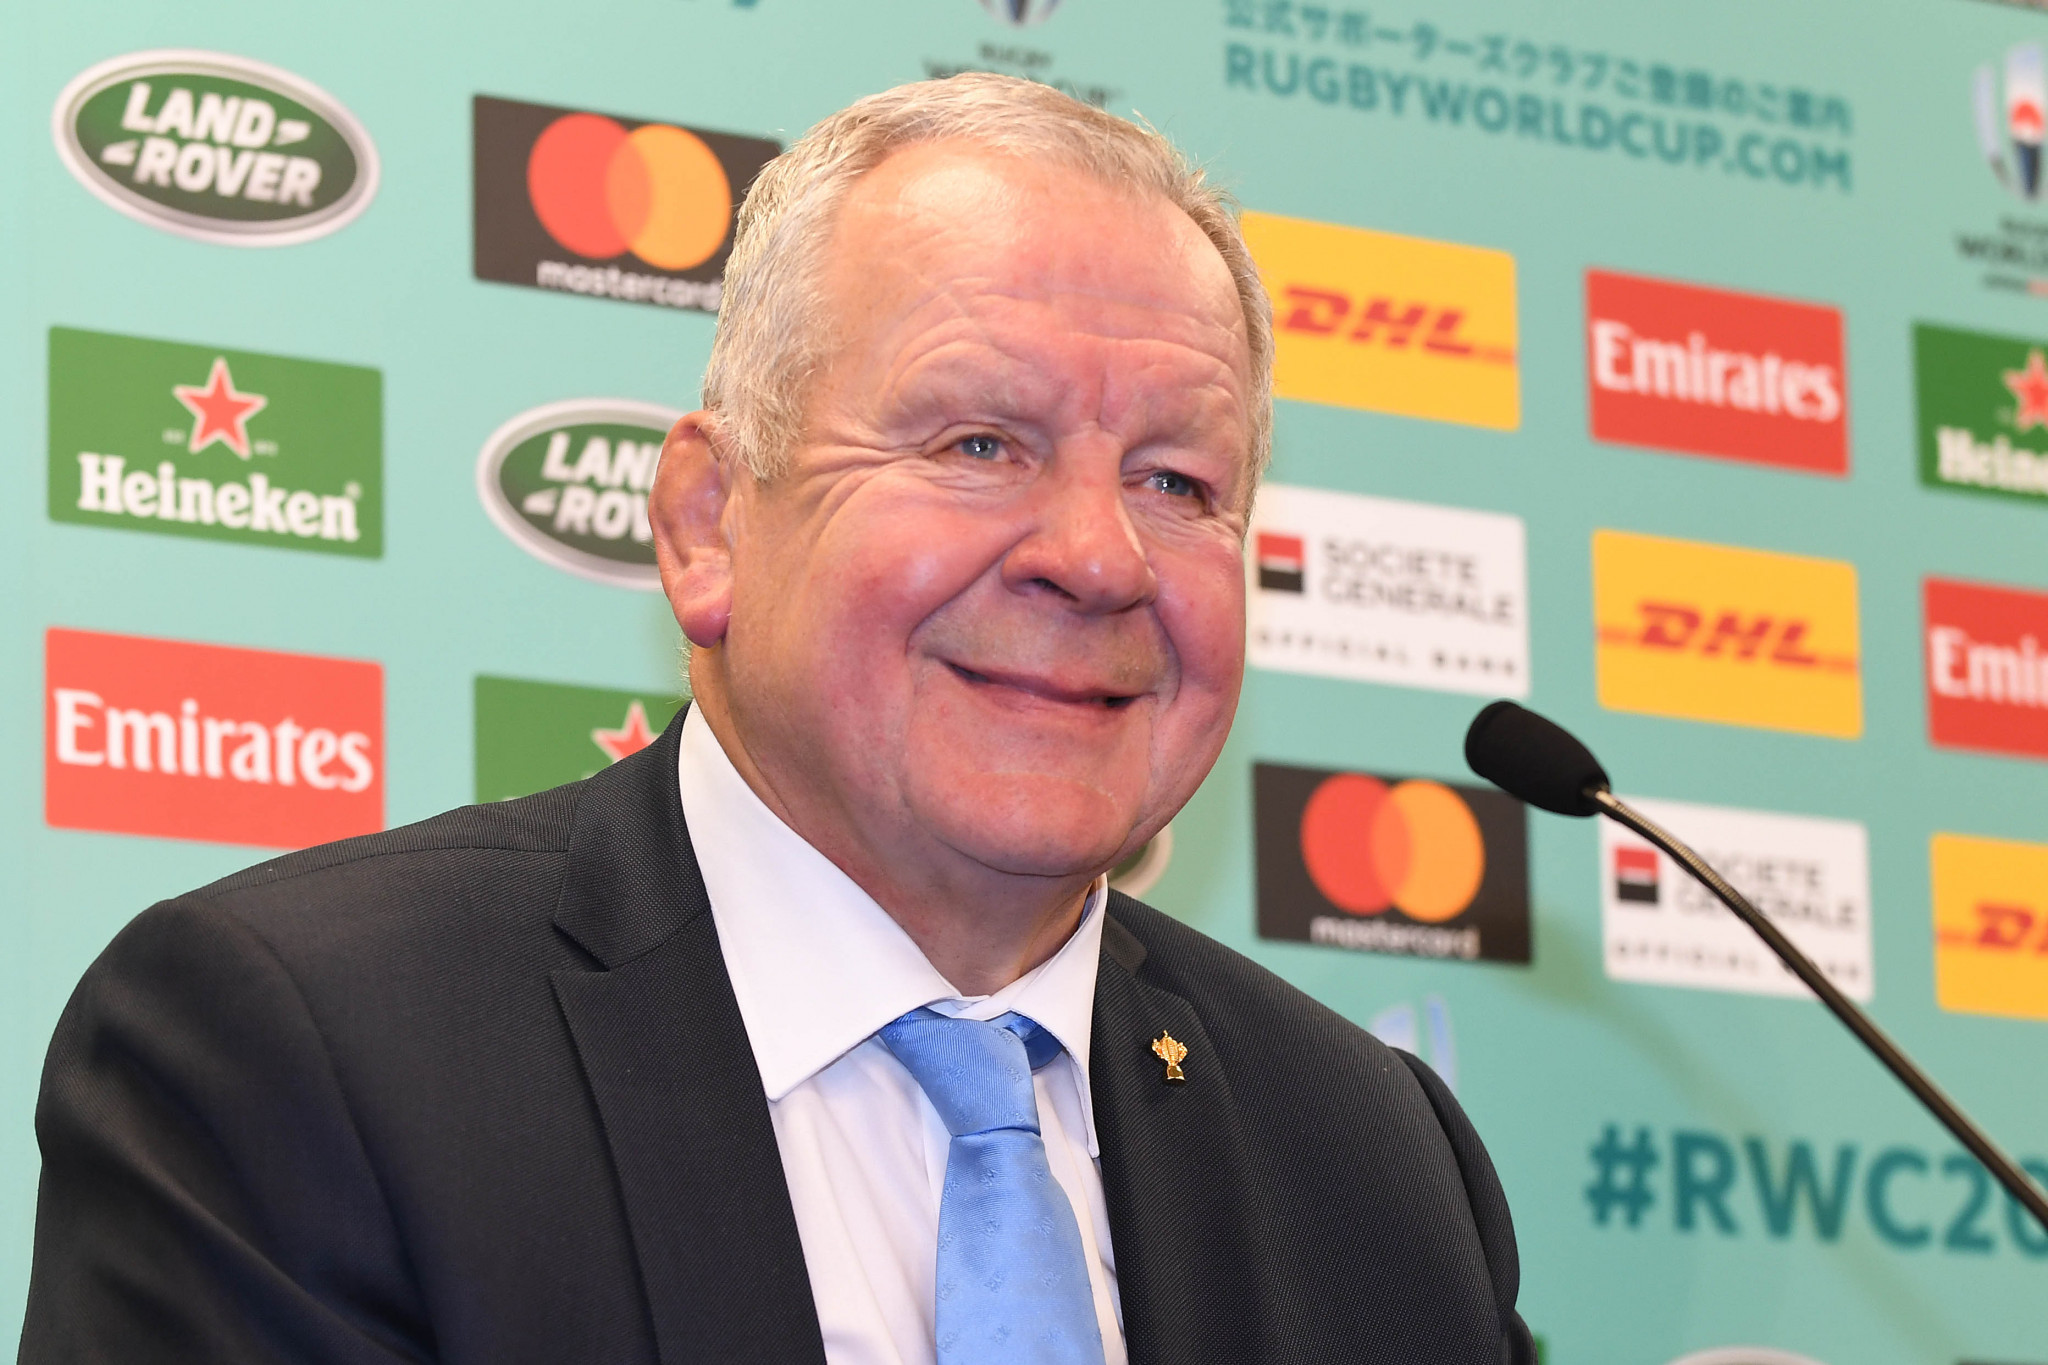 Today's reforms are seen as "a major milestone in the progression and growth of World Rugby and the global game," according to the governing body's chairman Bill Beaumont ©Getty Images